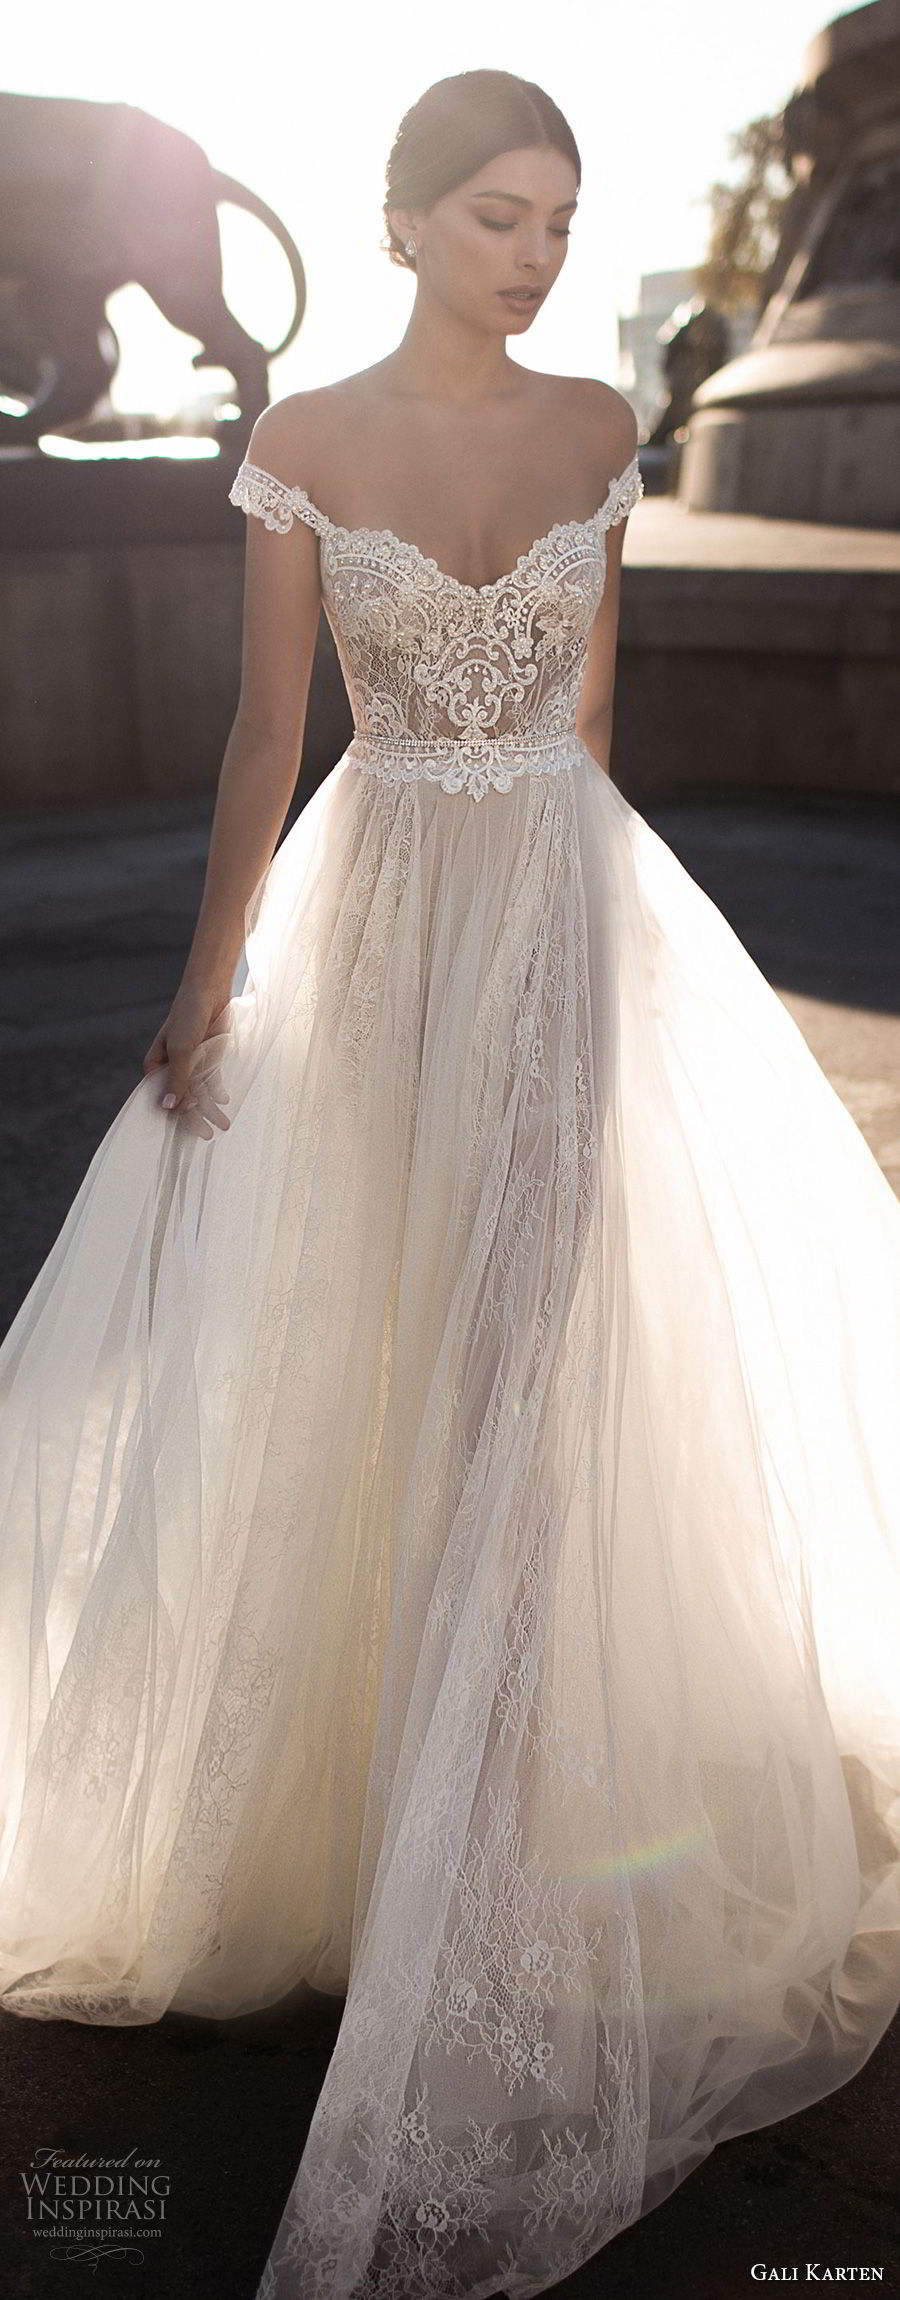 Romantic 2017 Wedding Dresses — Part 1: A-Lines and Ball Gowns